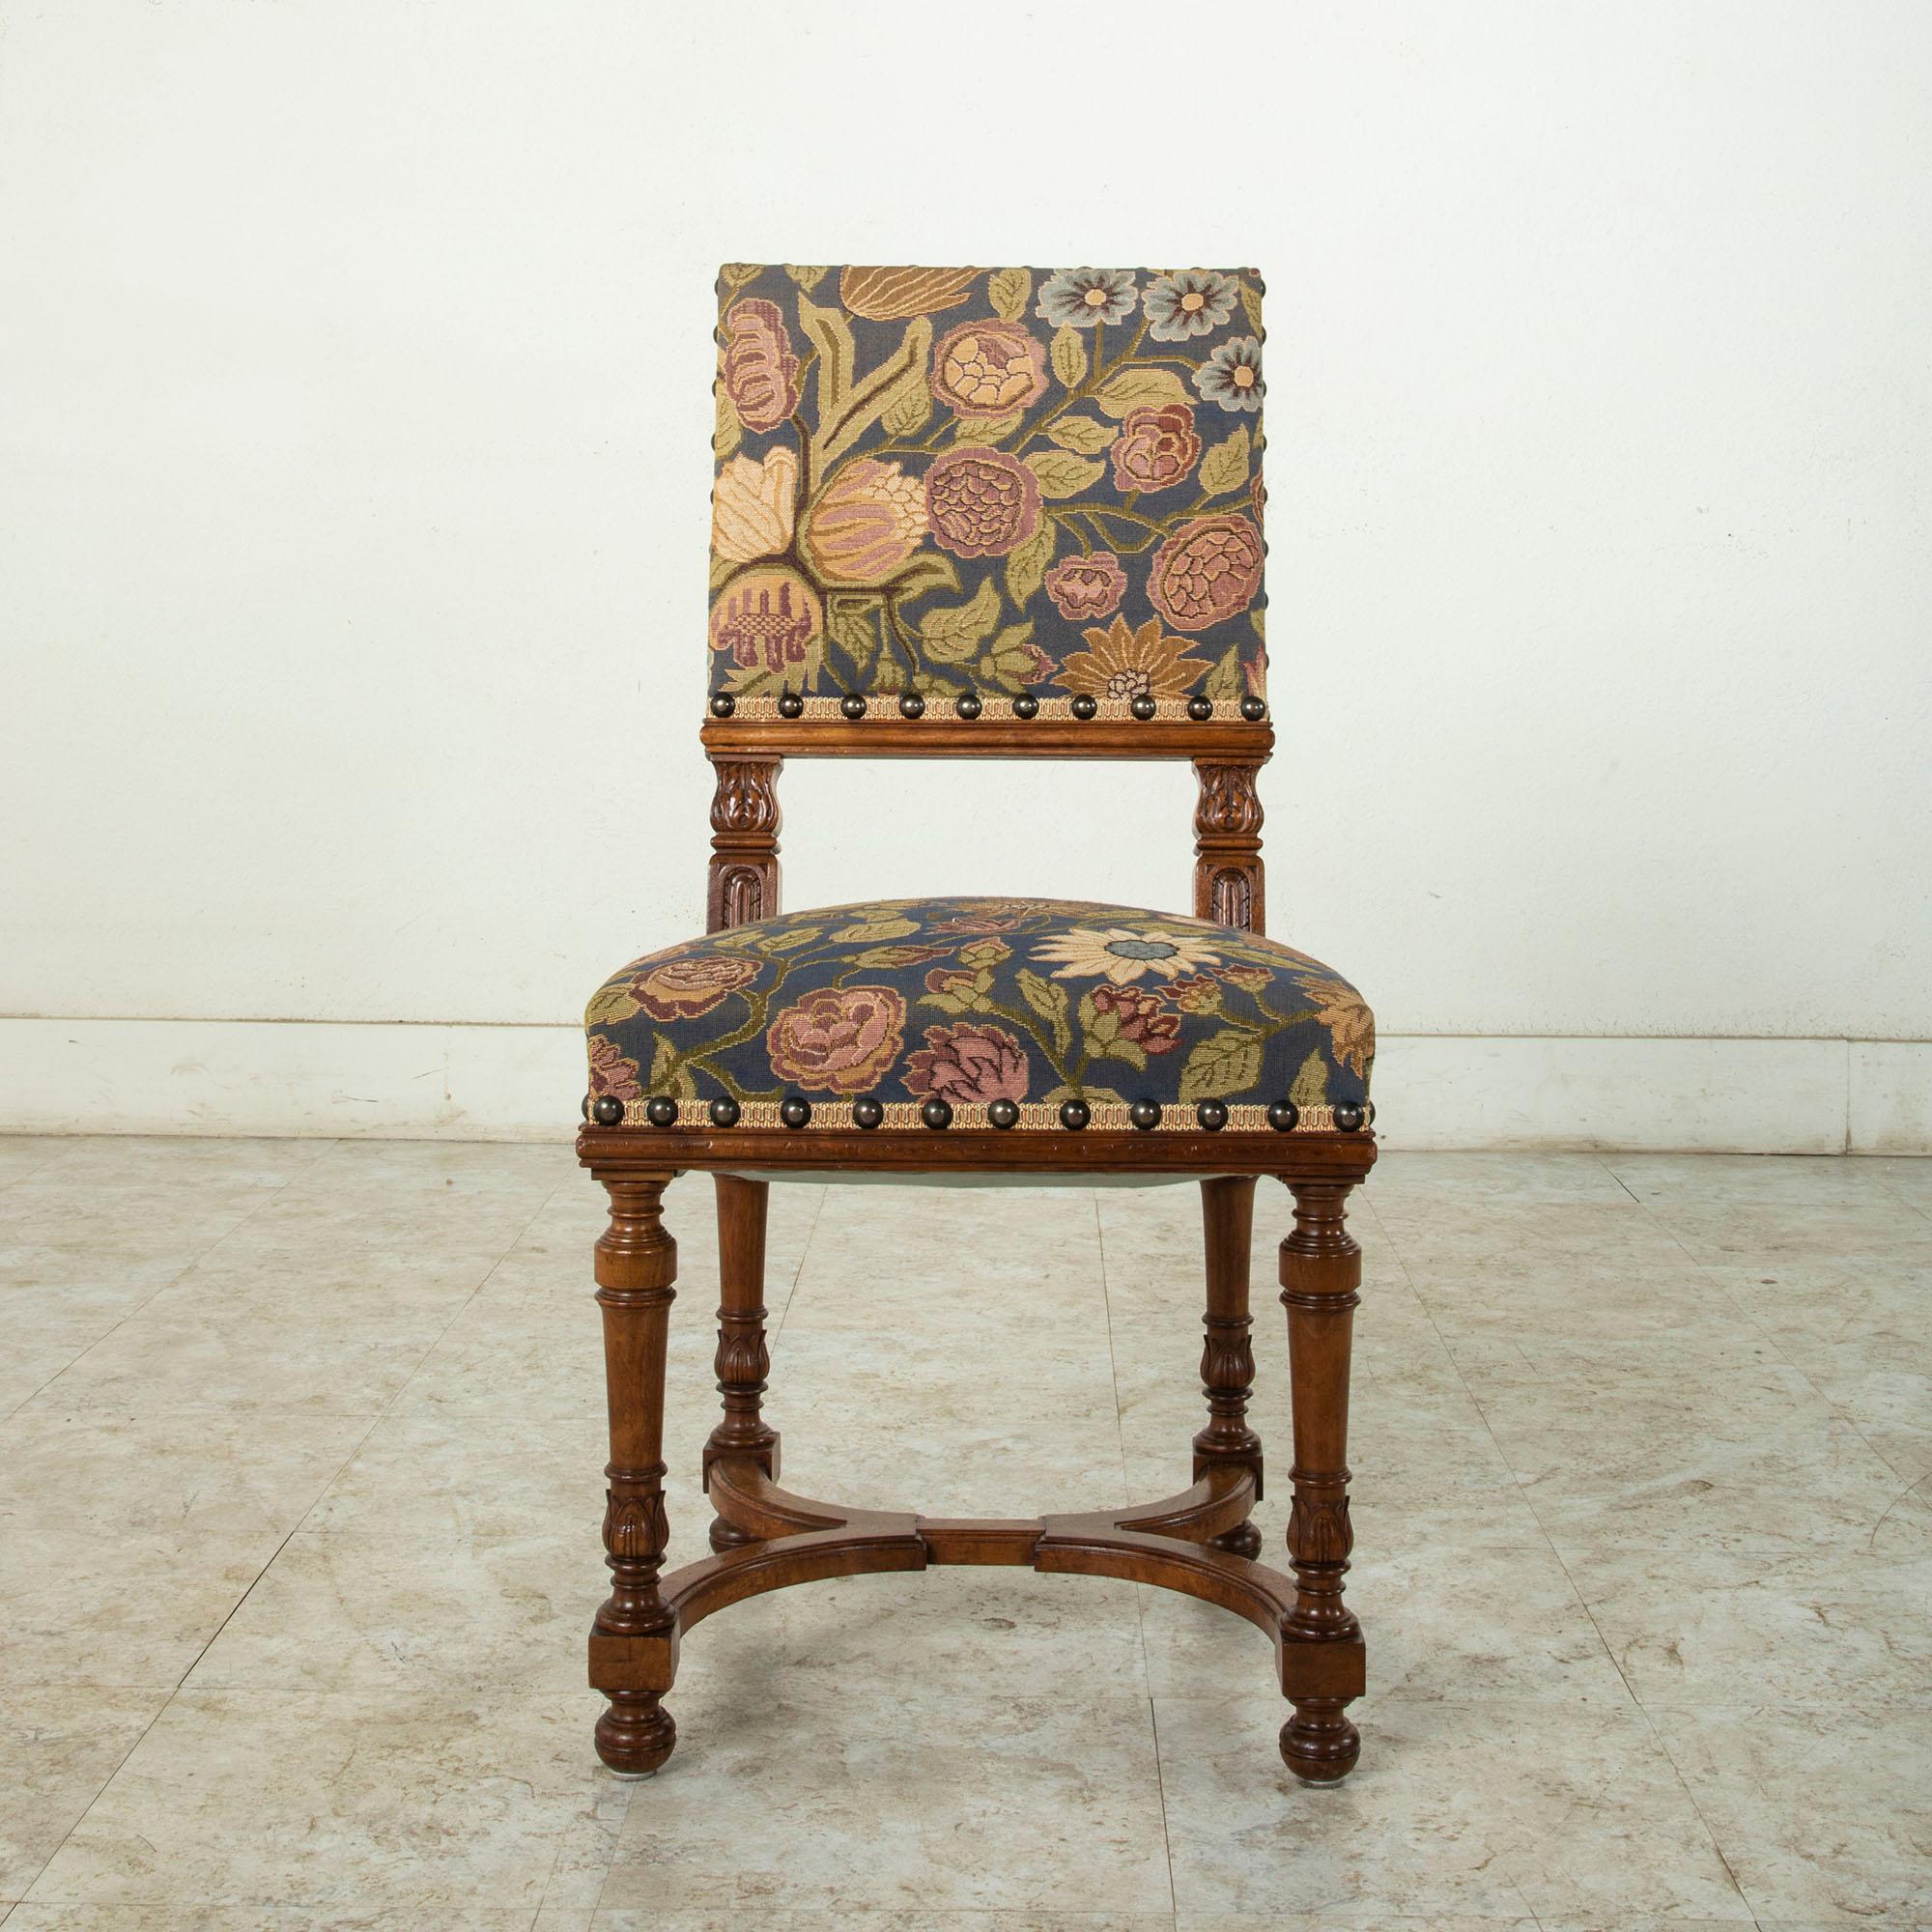 This set of six French Henri II style walnut side chairs or dining chairs features hand carved details of leaves on the seat back and turned legs. A curved X-stretcher between the legs provides stability. The chairs are upholstered in tapestry with